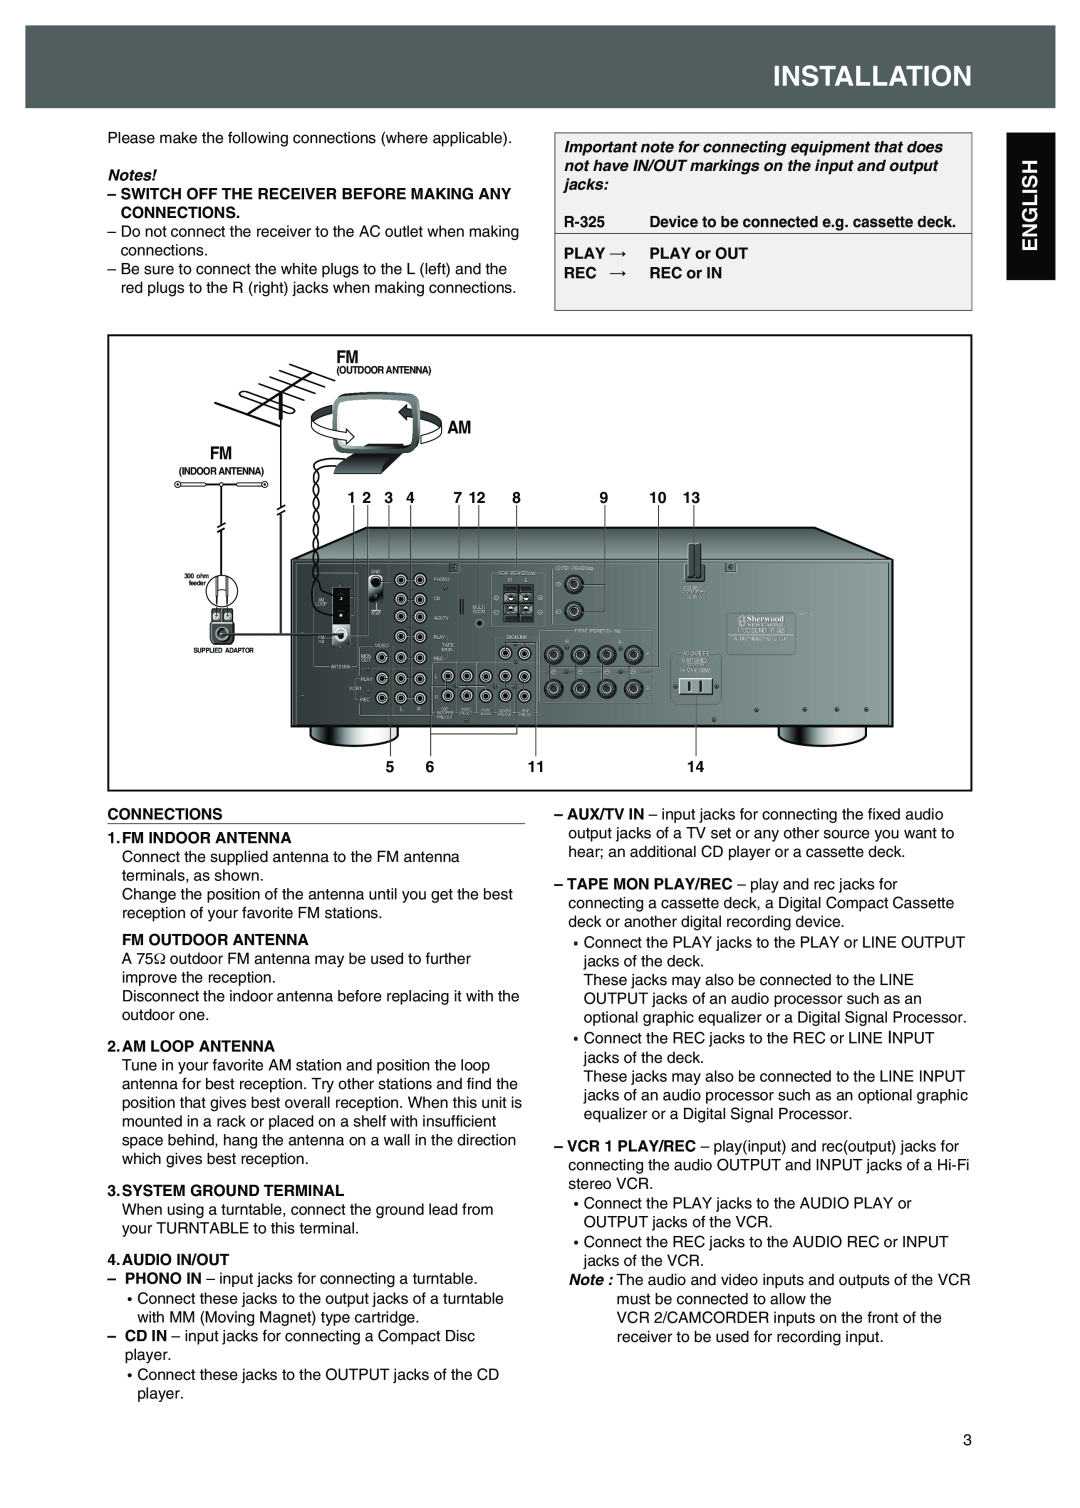 Sherwood R-325 operating instructions Installation, Connections, English, Am Fm 